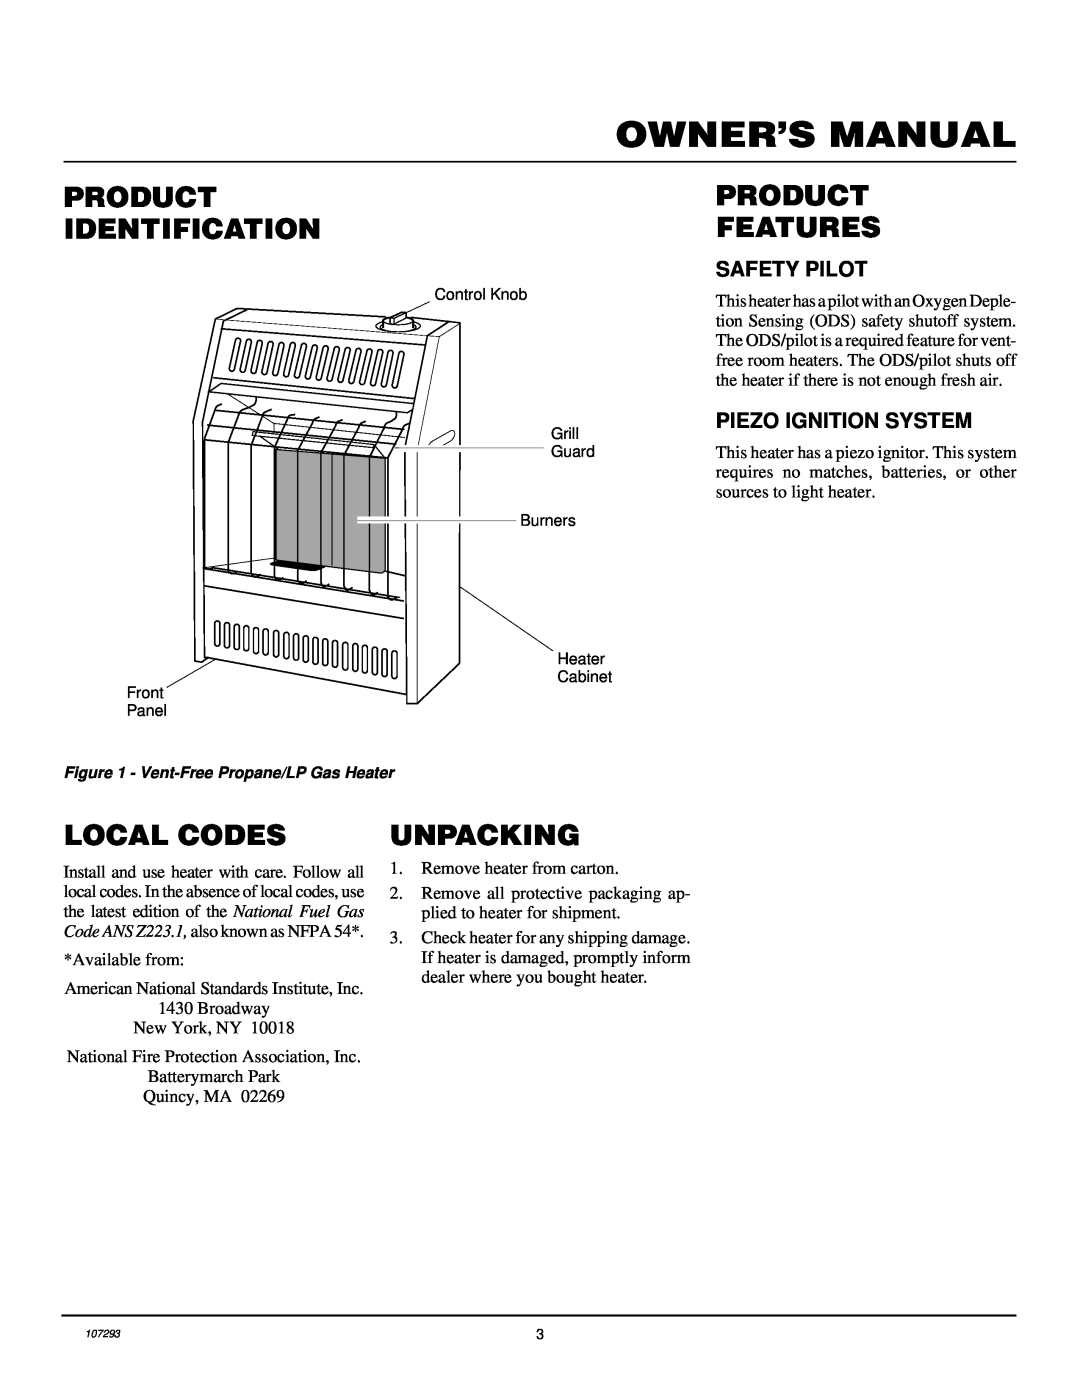 Desa CGR2P installation manual Product Identification, Product Features, Local Codes, Unpacking 